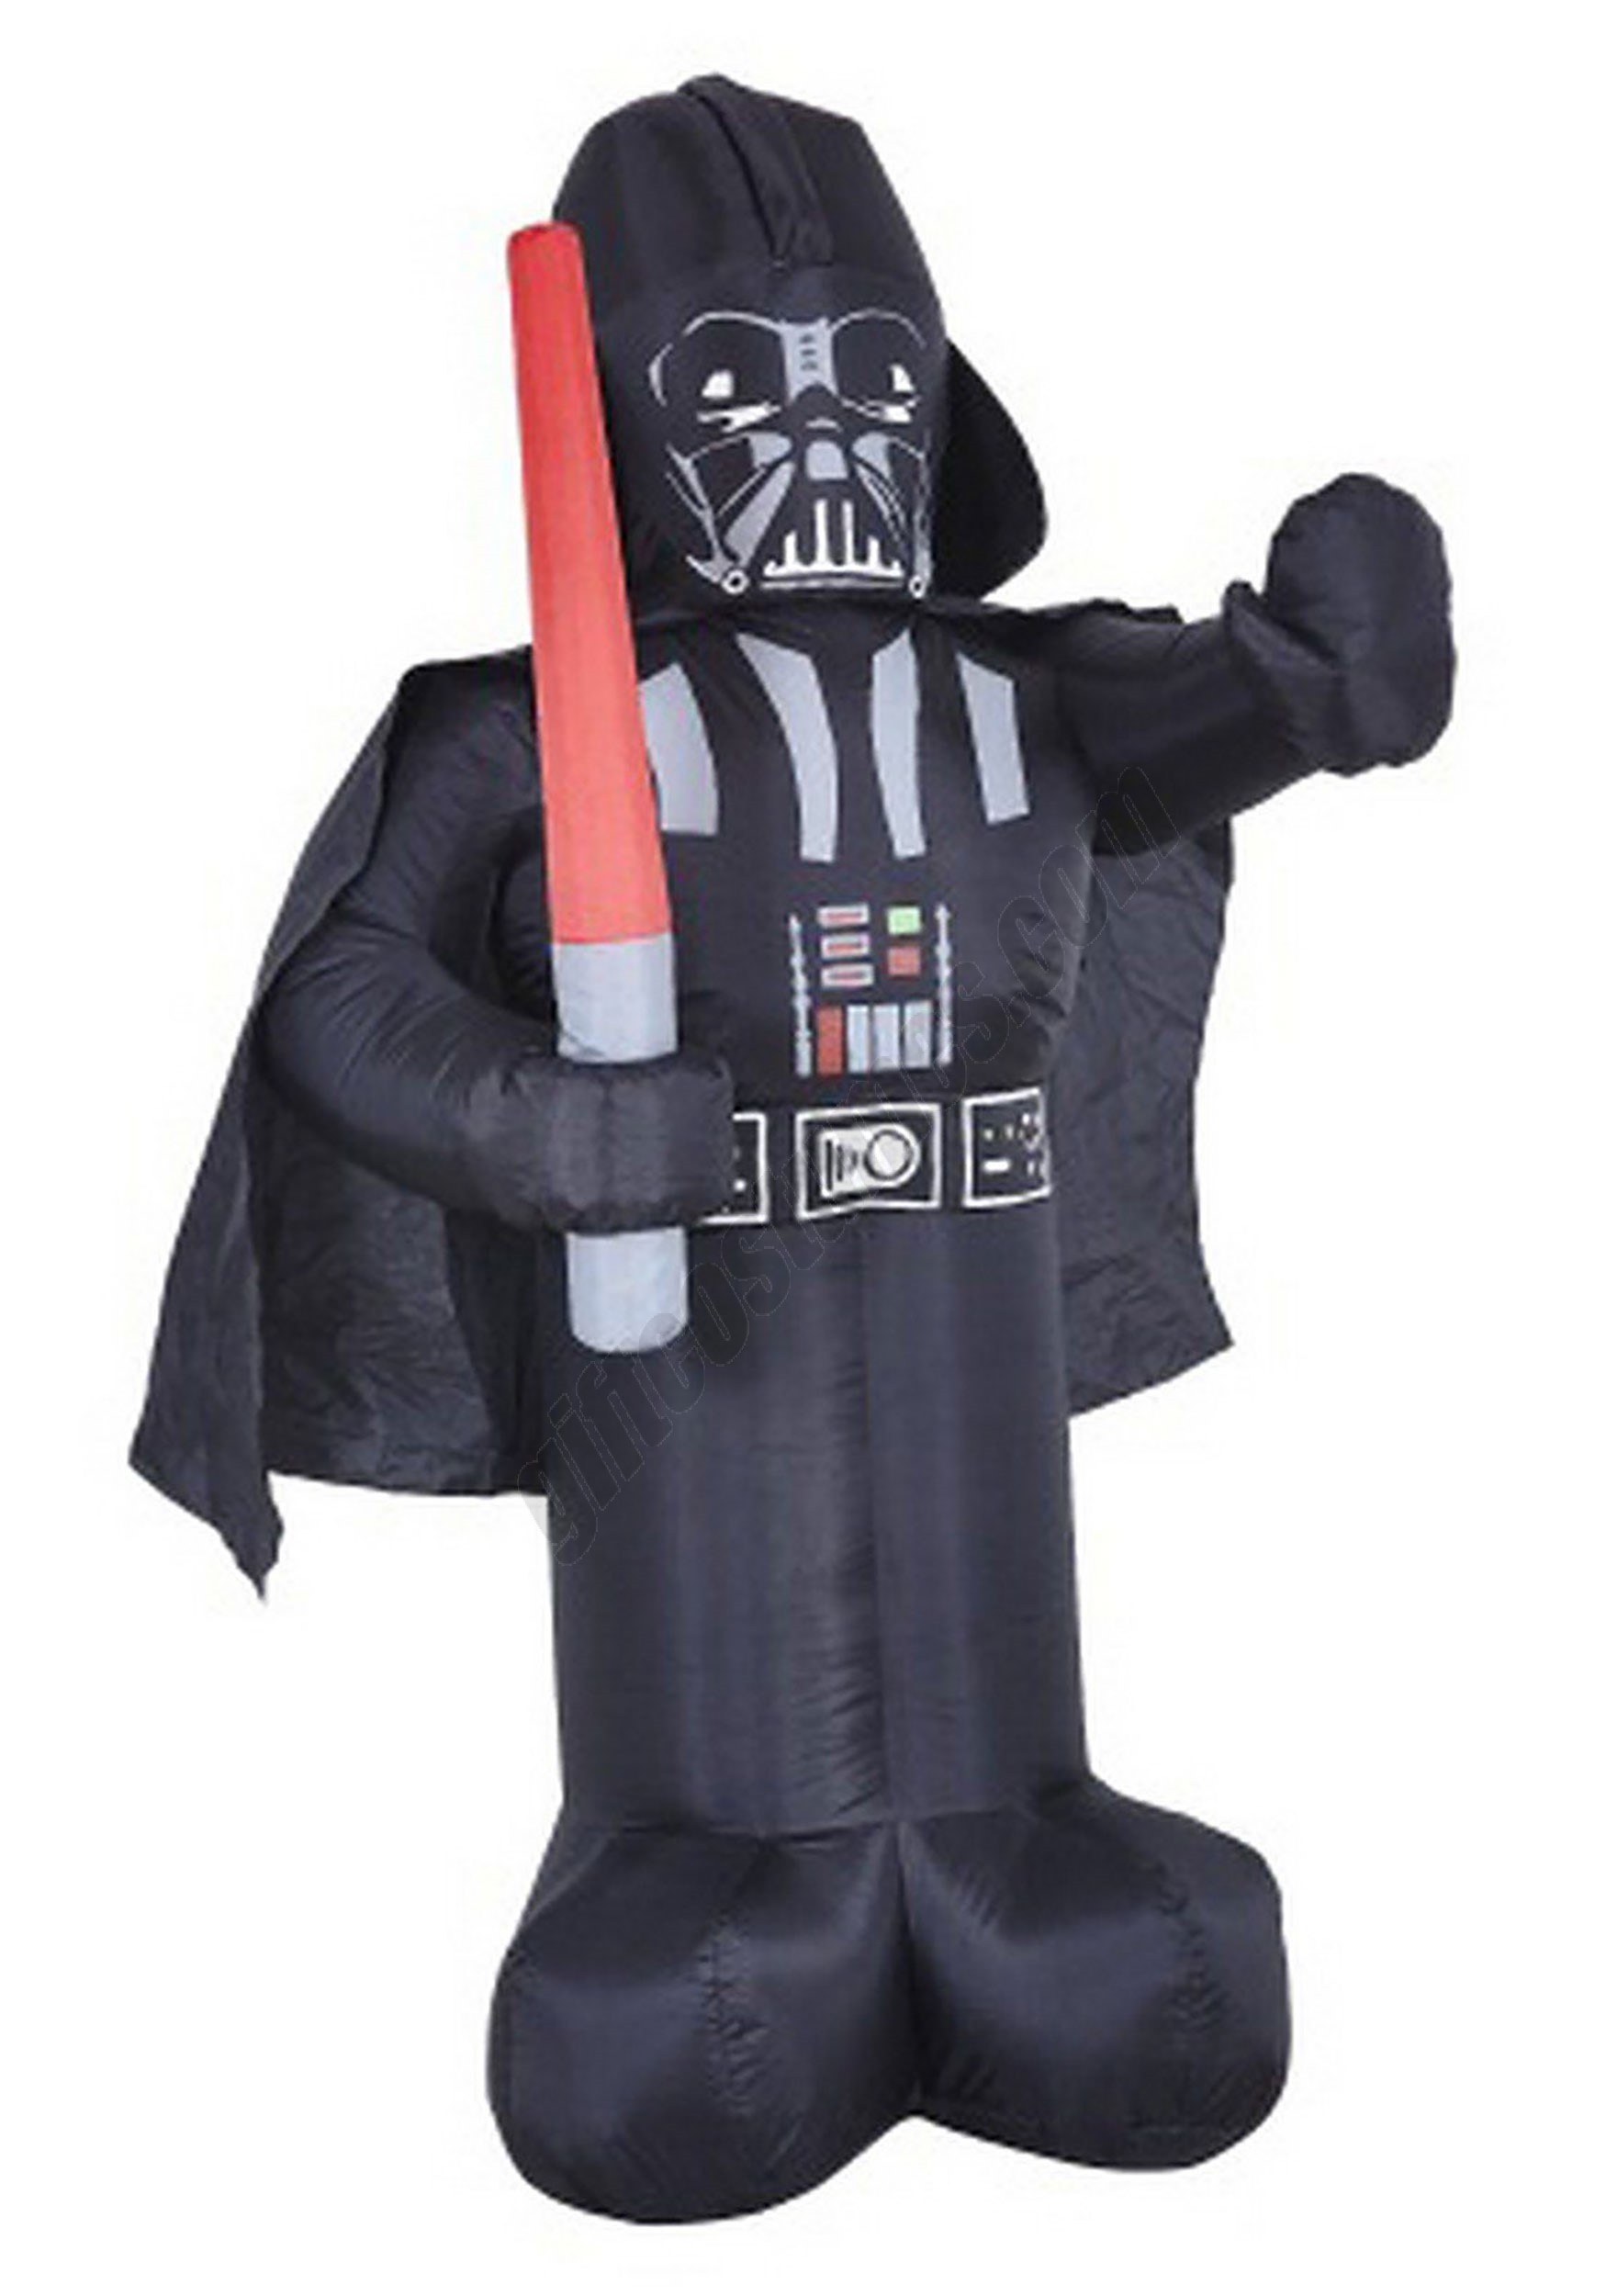 Star Wars Inflatable Darth Vader Decoration Promotions - Star Wars Inflatable Darth Vader Decoration Promotions